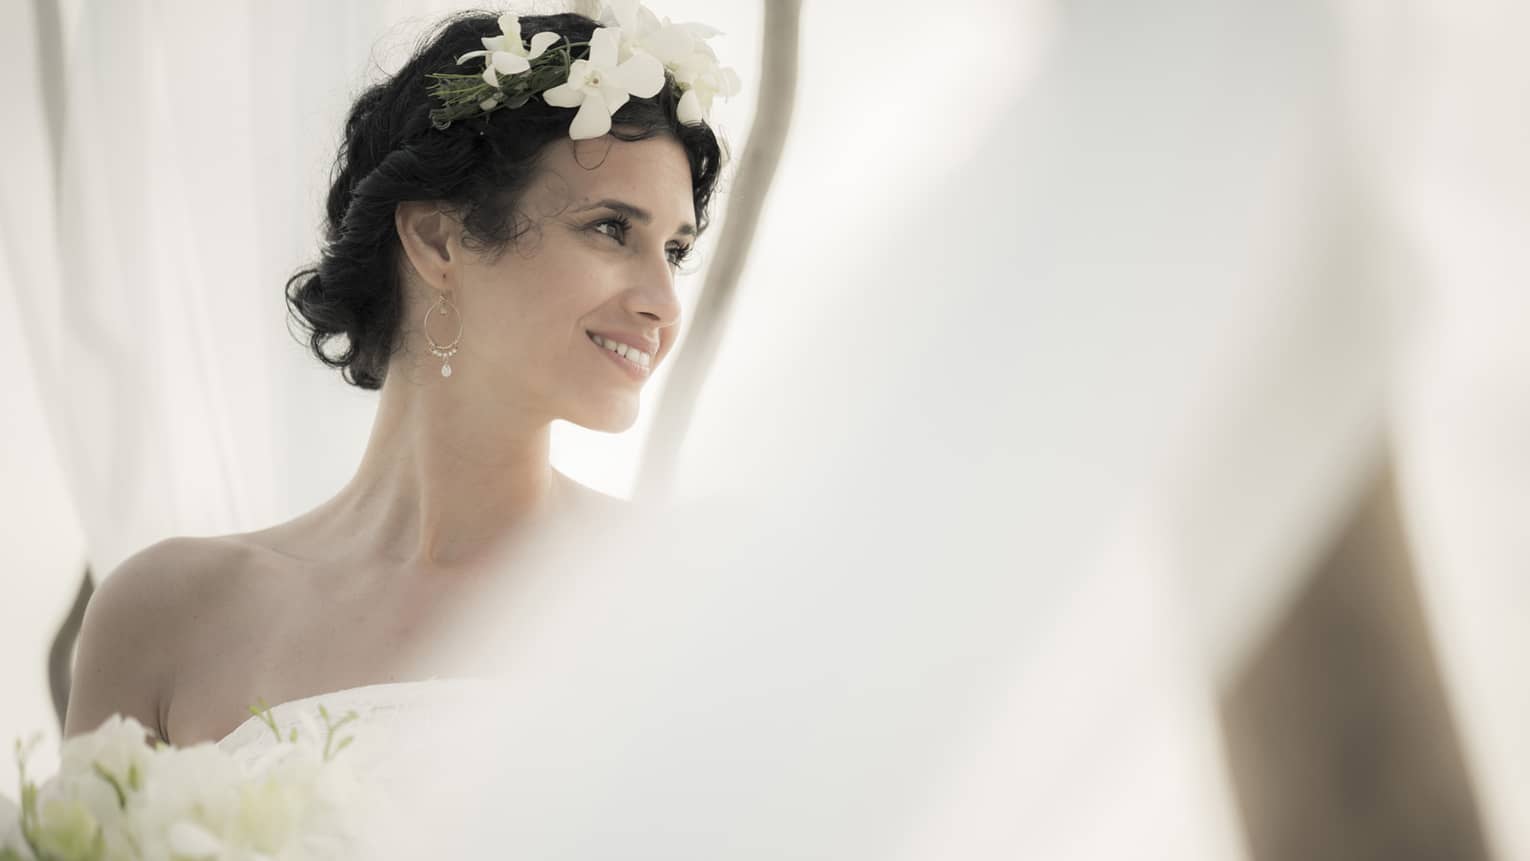 Smiling bride with flowers in hair behind white linen